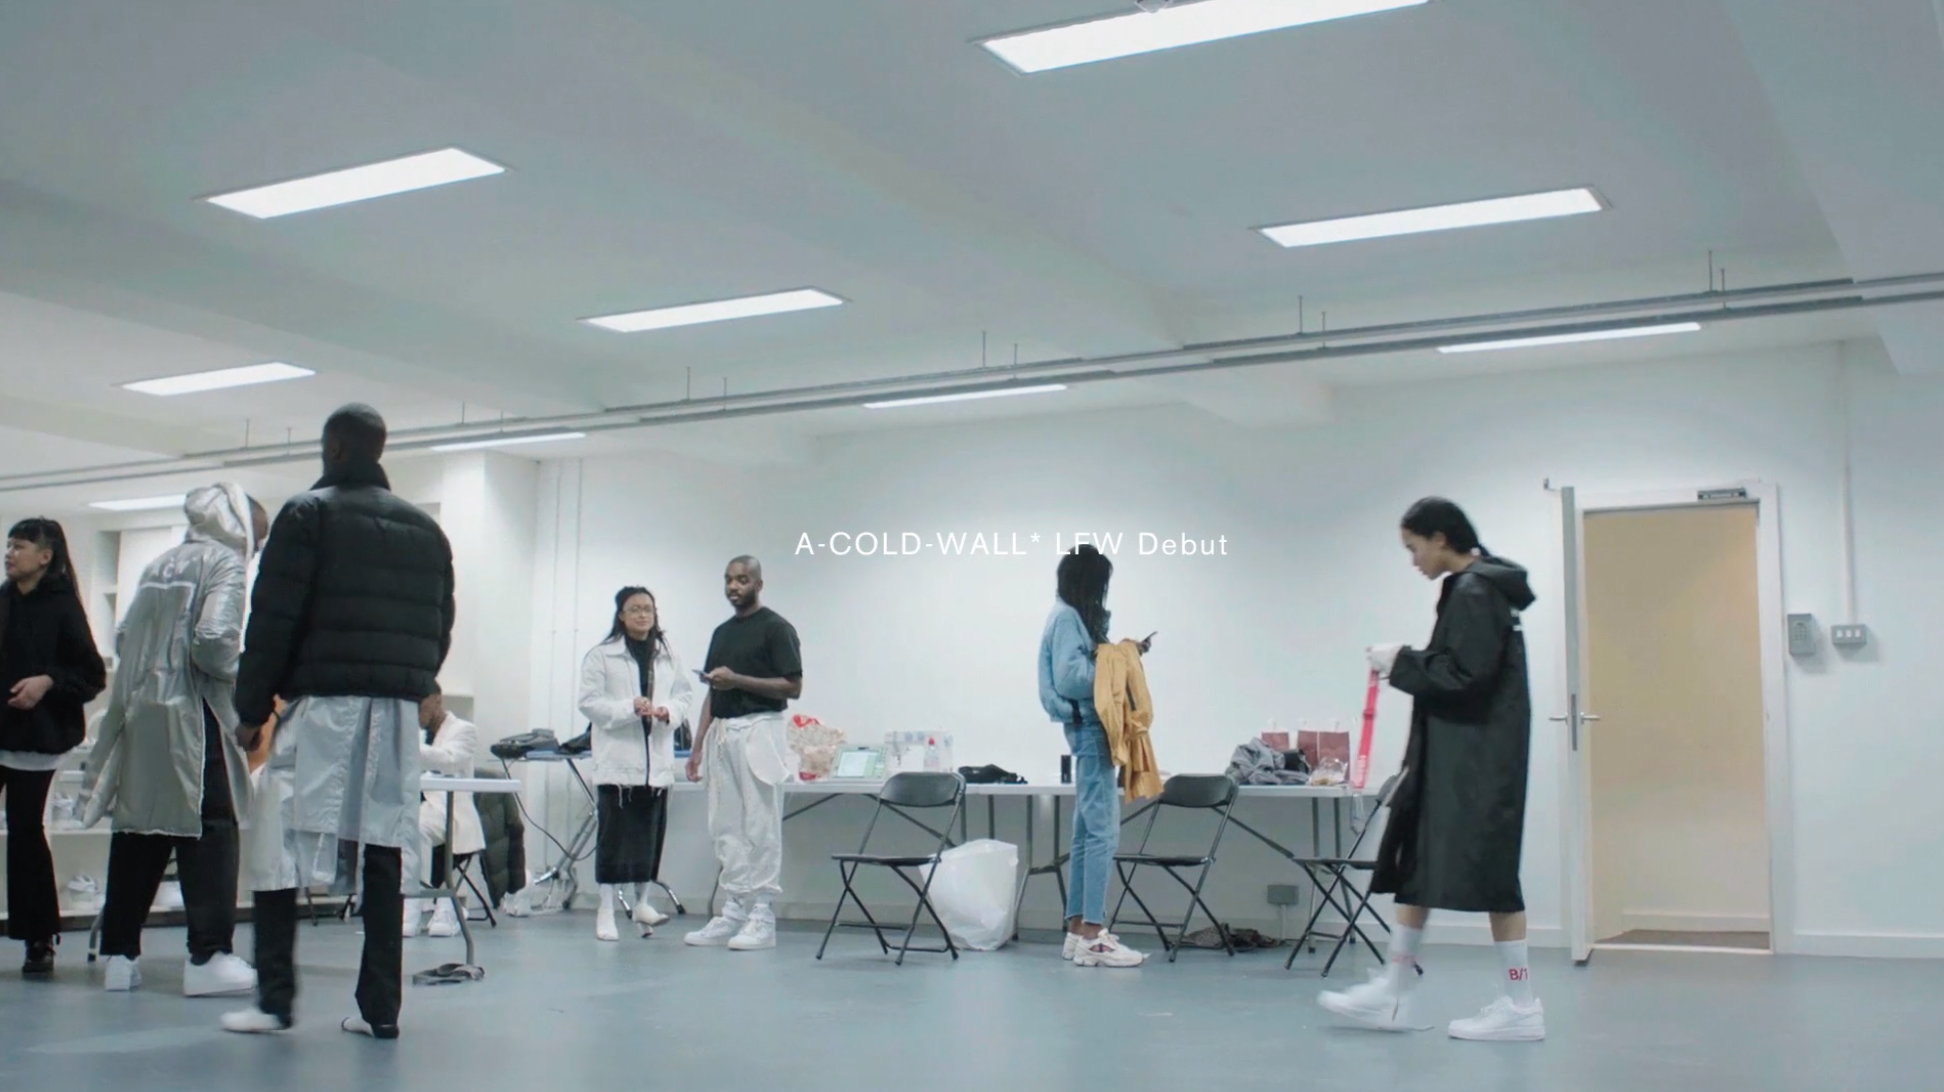 Watch Behind The Scenes At A-COLD-WALL*’s LFWM 2017 Debut